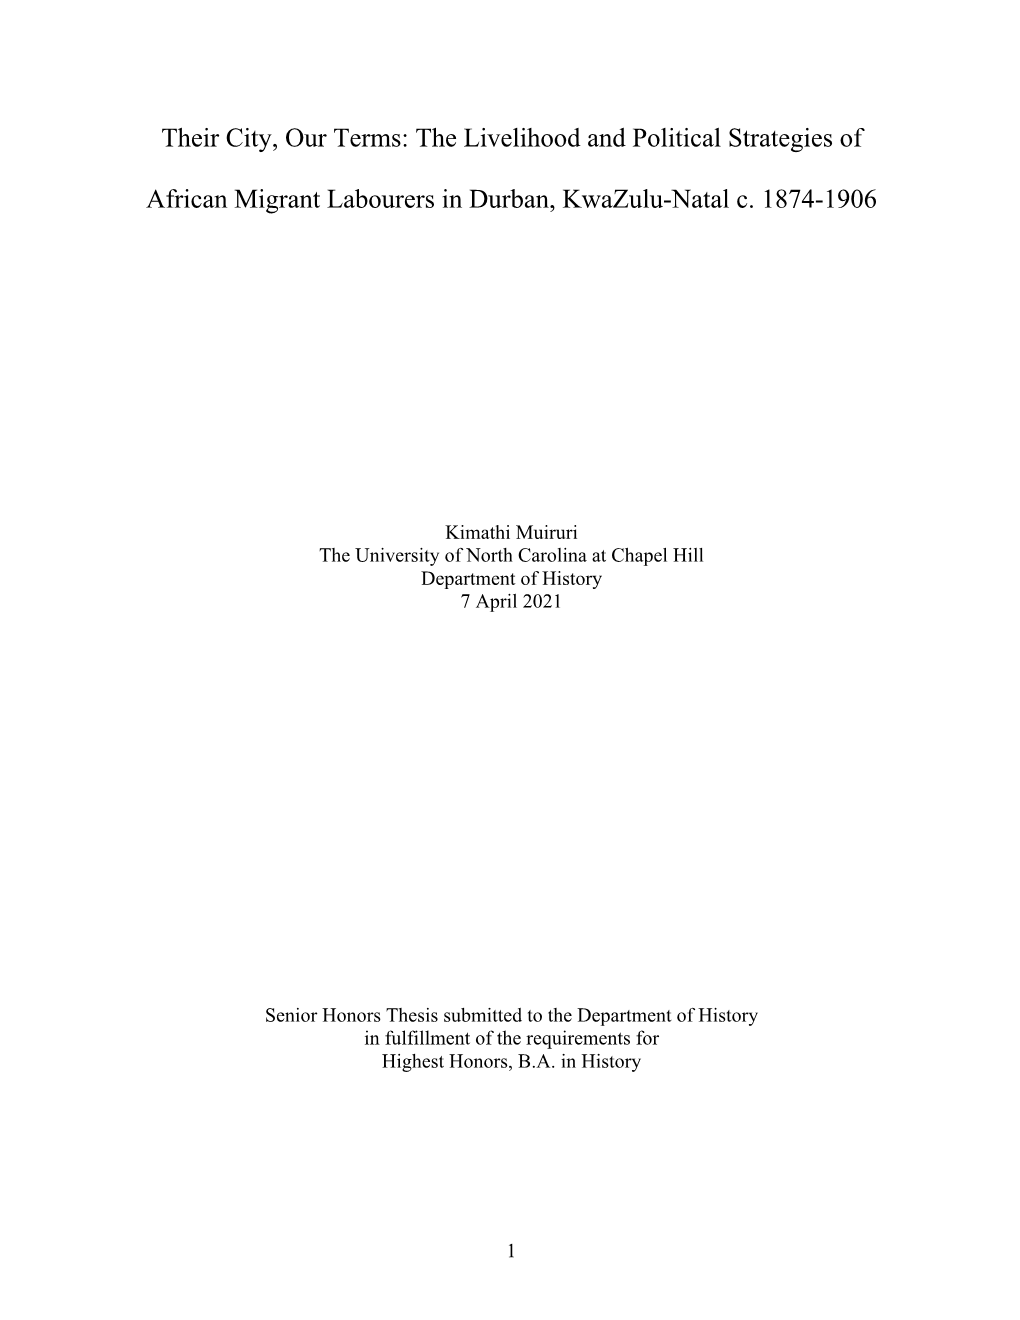 The Livelihood and Political Strategies of African Migrant Labourers in Durban, Kwazulu-Natal C